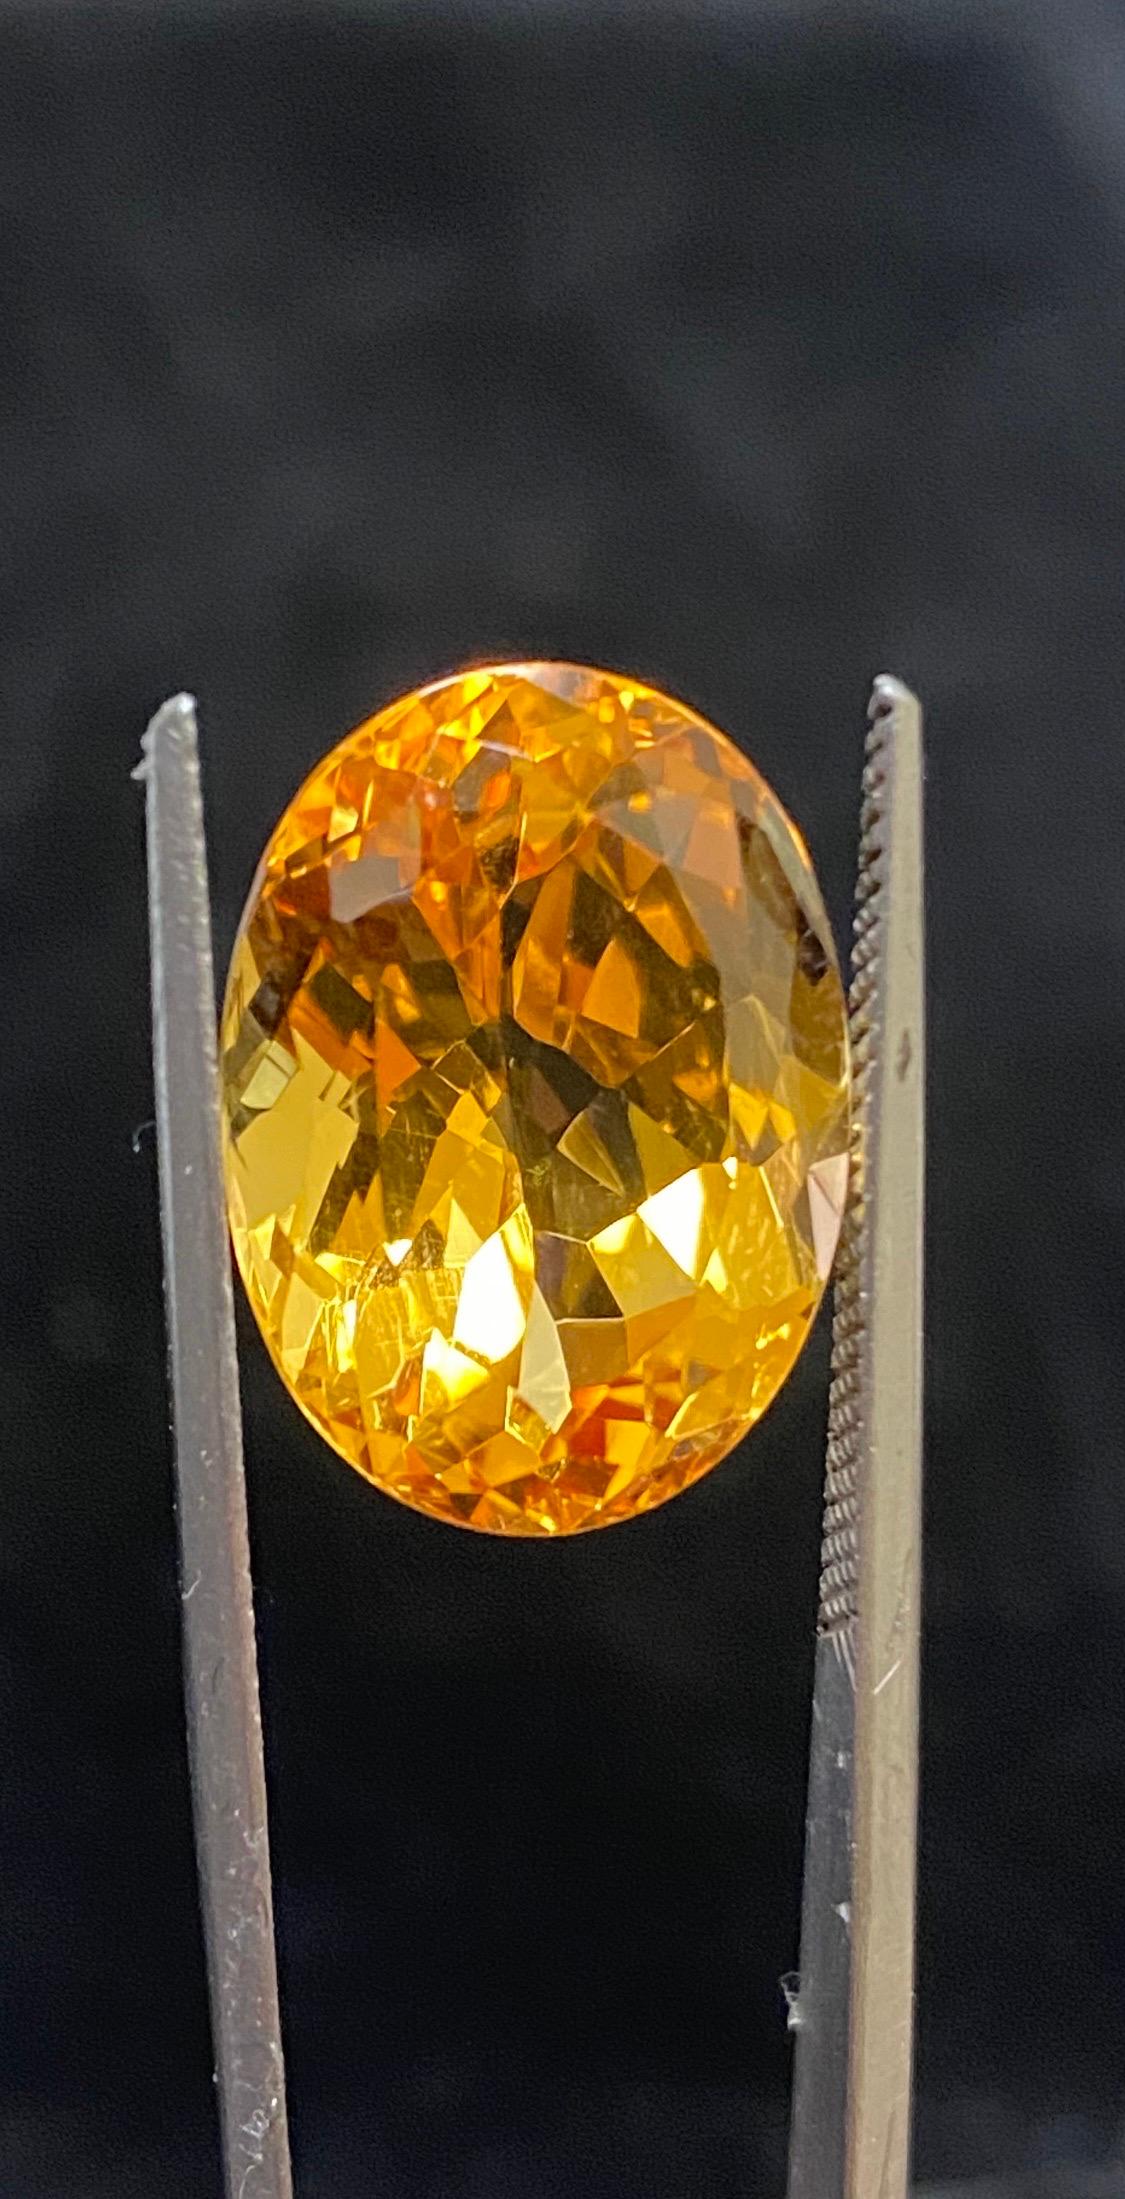 GIA Certified Yellow-Orange Oval Imperial Topaz 

Shape- Oval Modified Brilliant Cut

Carat Weight- 2.91 Carats

GIA Report Number- 2231069294

Measurements- 17.47 x 2.81 x 9.20

An Amazing Imperial Topaz That is Out of This World!

Featuring An